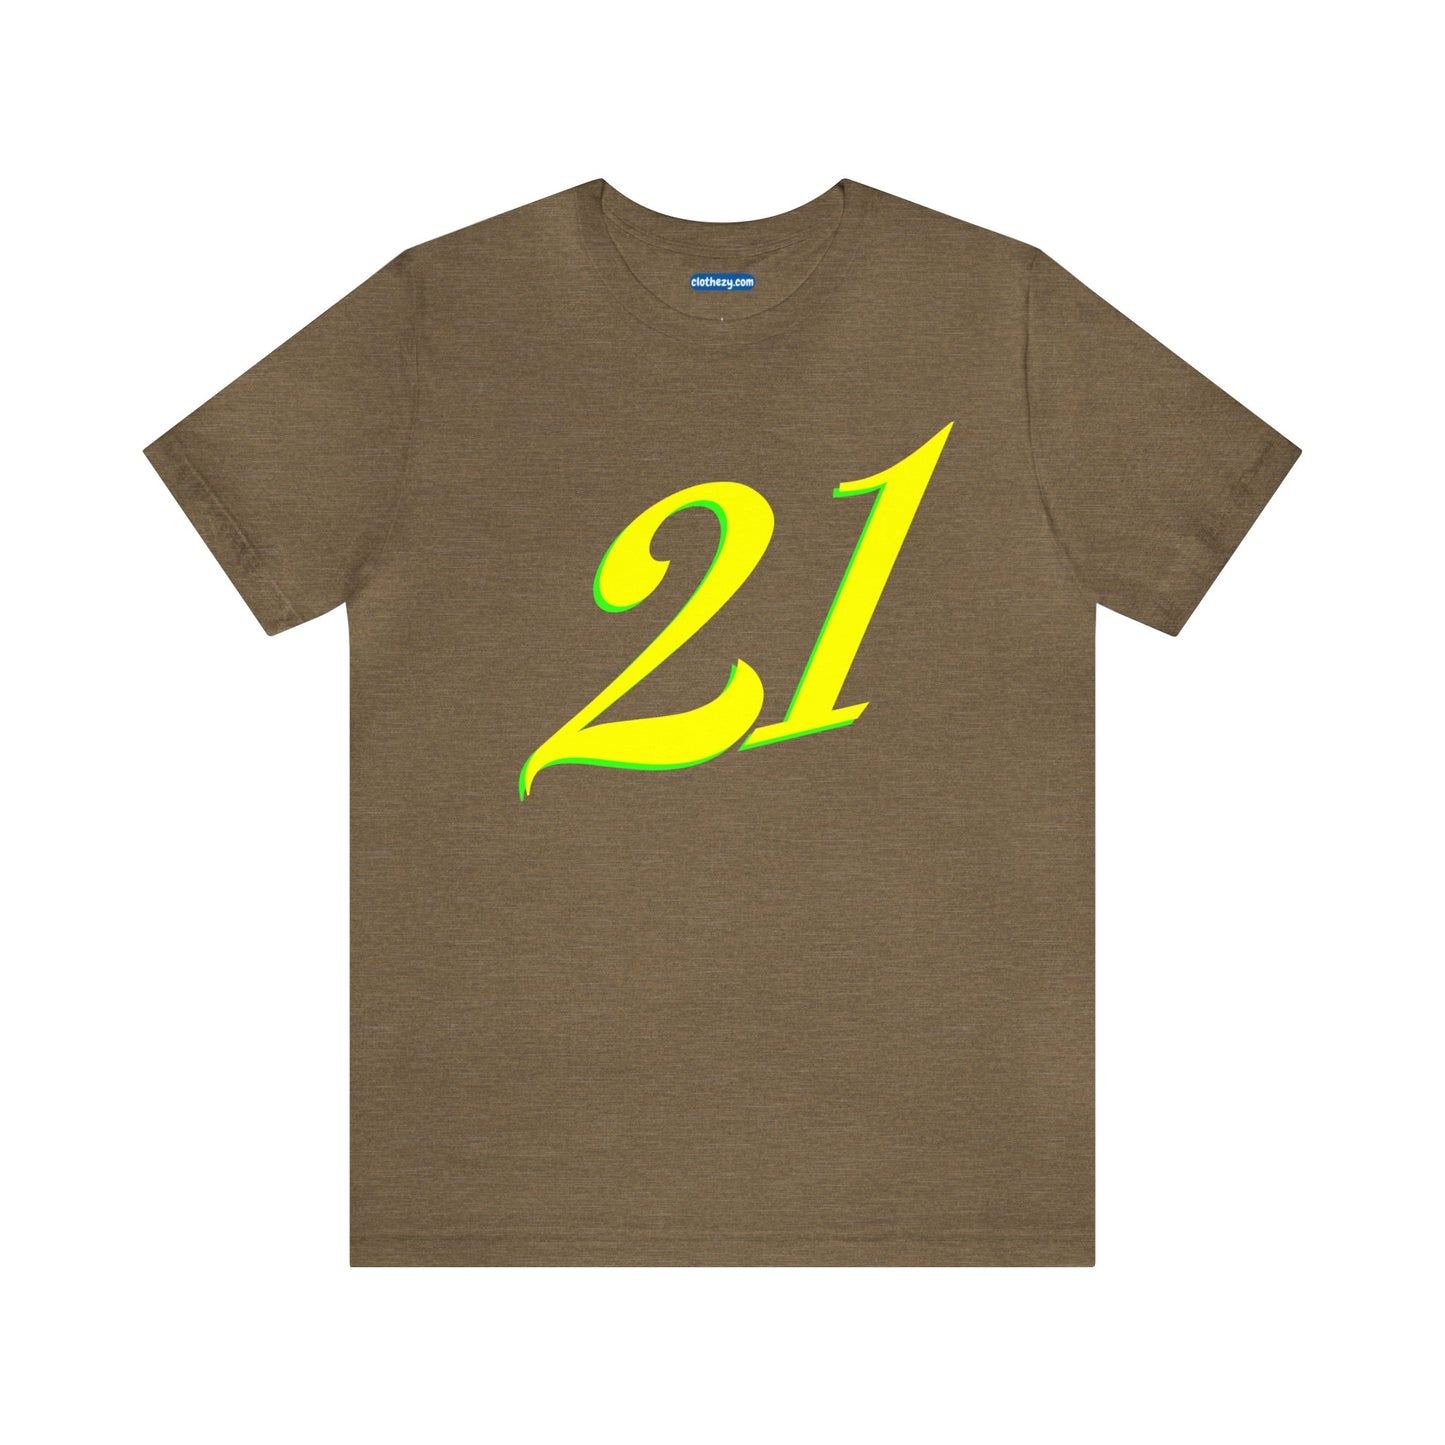 Number 21 Design - Soft Cotton Tee for birthdays and celebrations, Gift for friends and family, Multiple Options by clothezy.com in Olive Heather Size Small - Buy Now